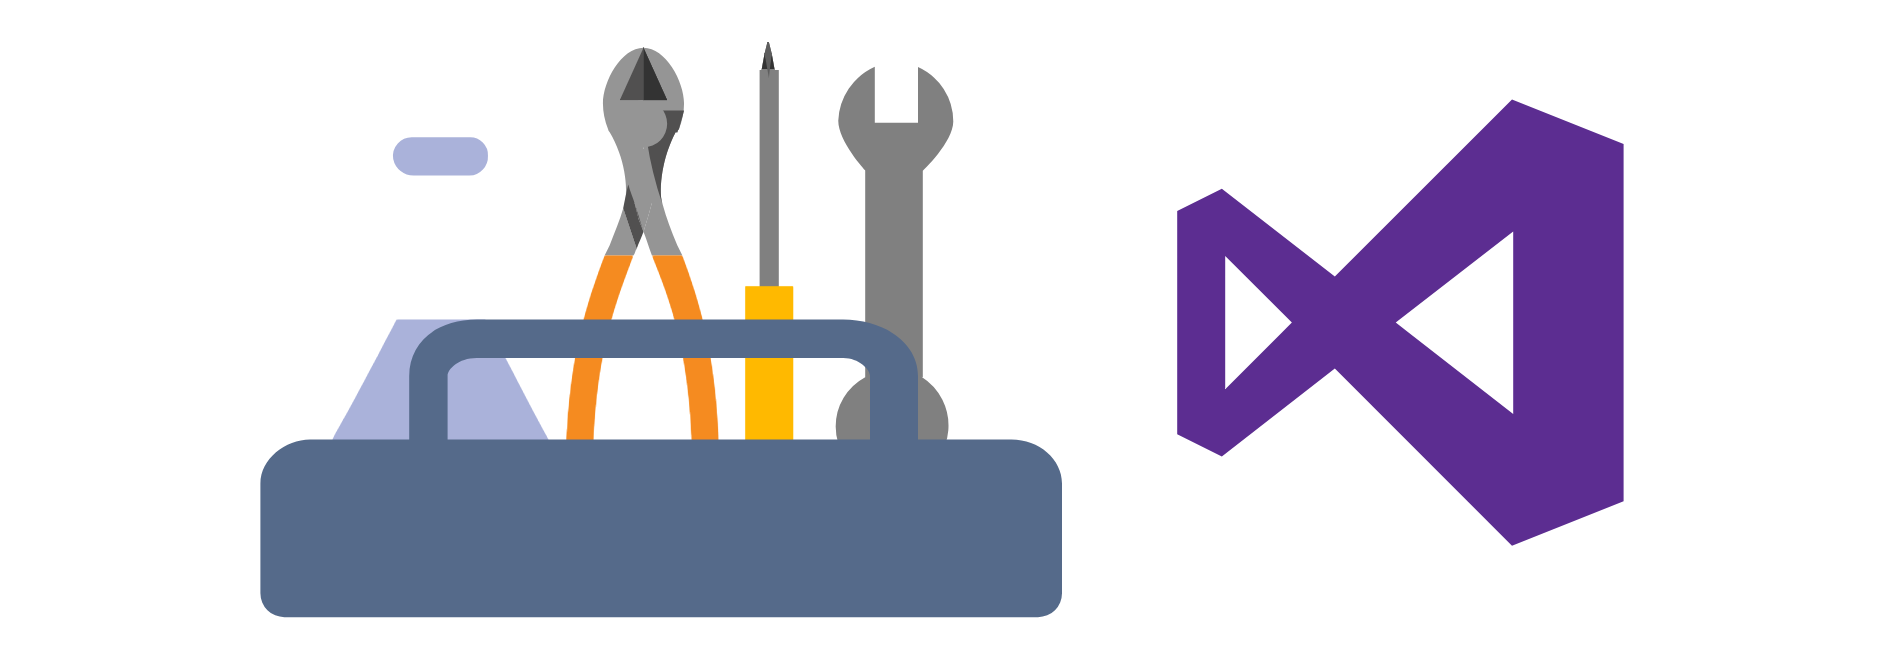 How to run Visual Studio 2017 projects using Build Tools for Visual Studio